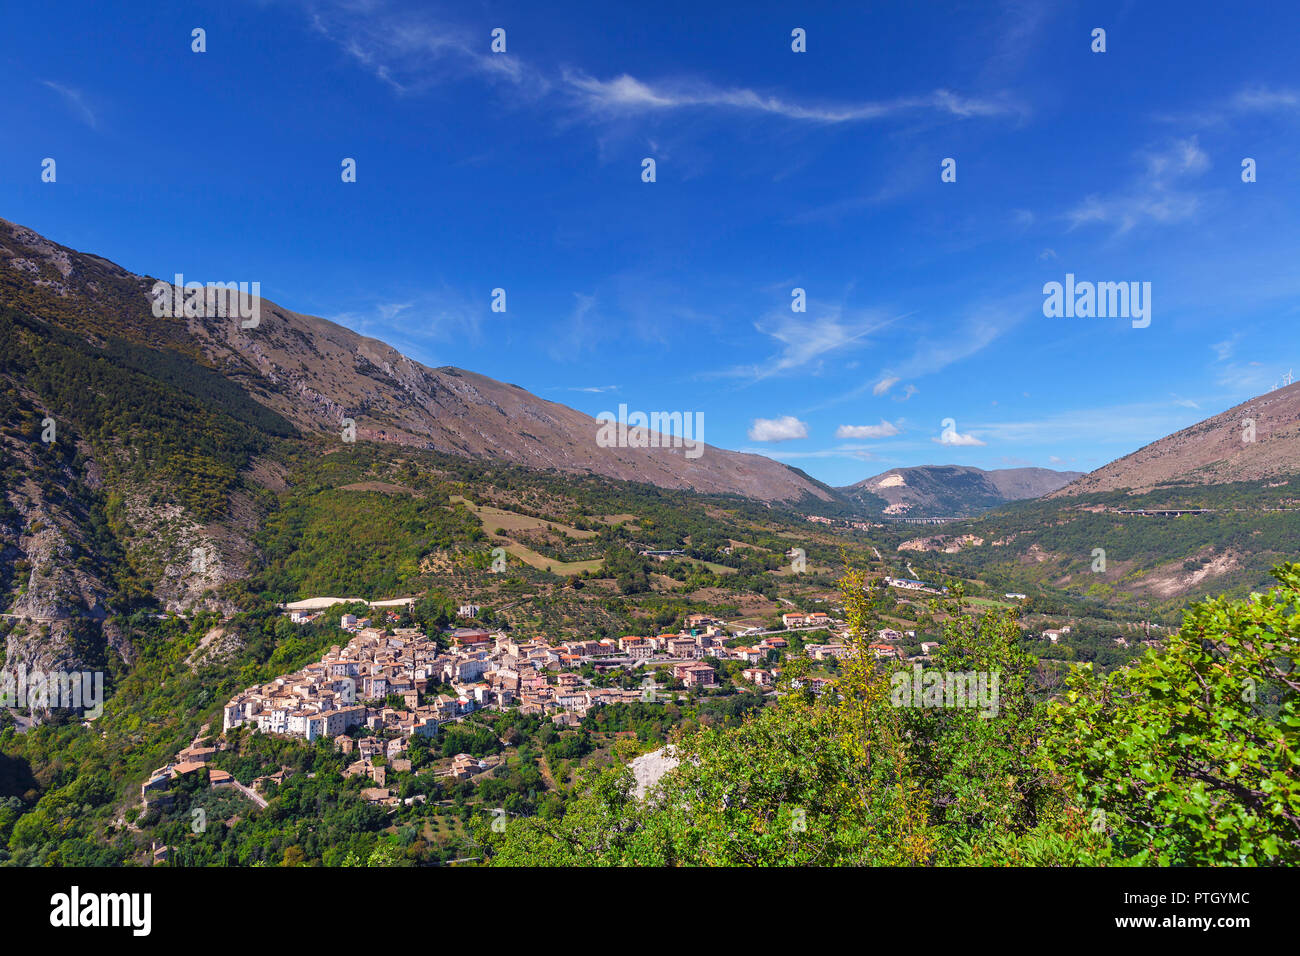 A distant view of Anversa degli Abruzzi a town in the province of L'Aquila in the Abruzzo region of southern Italy. Stock Photo